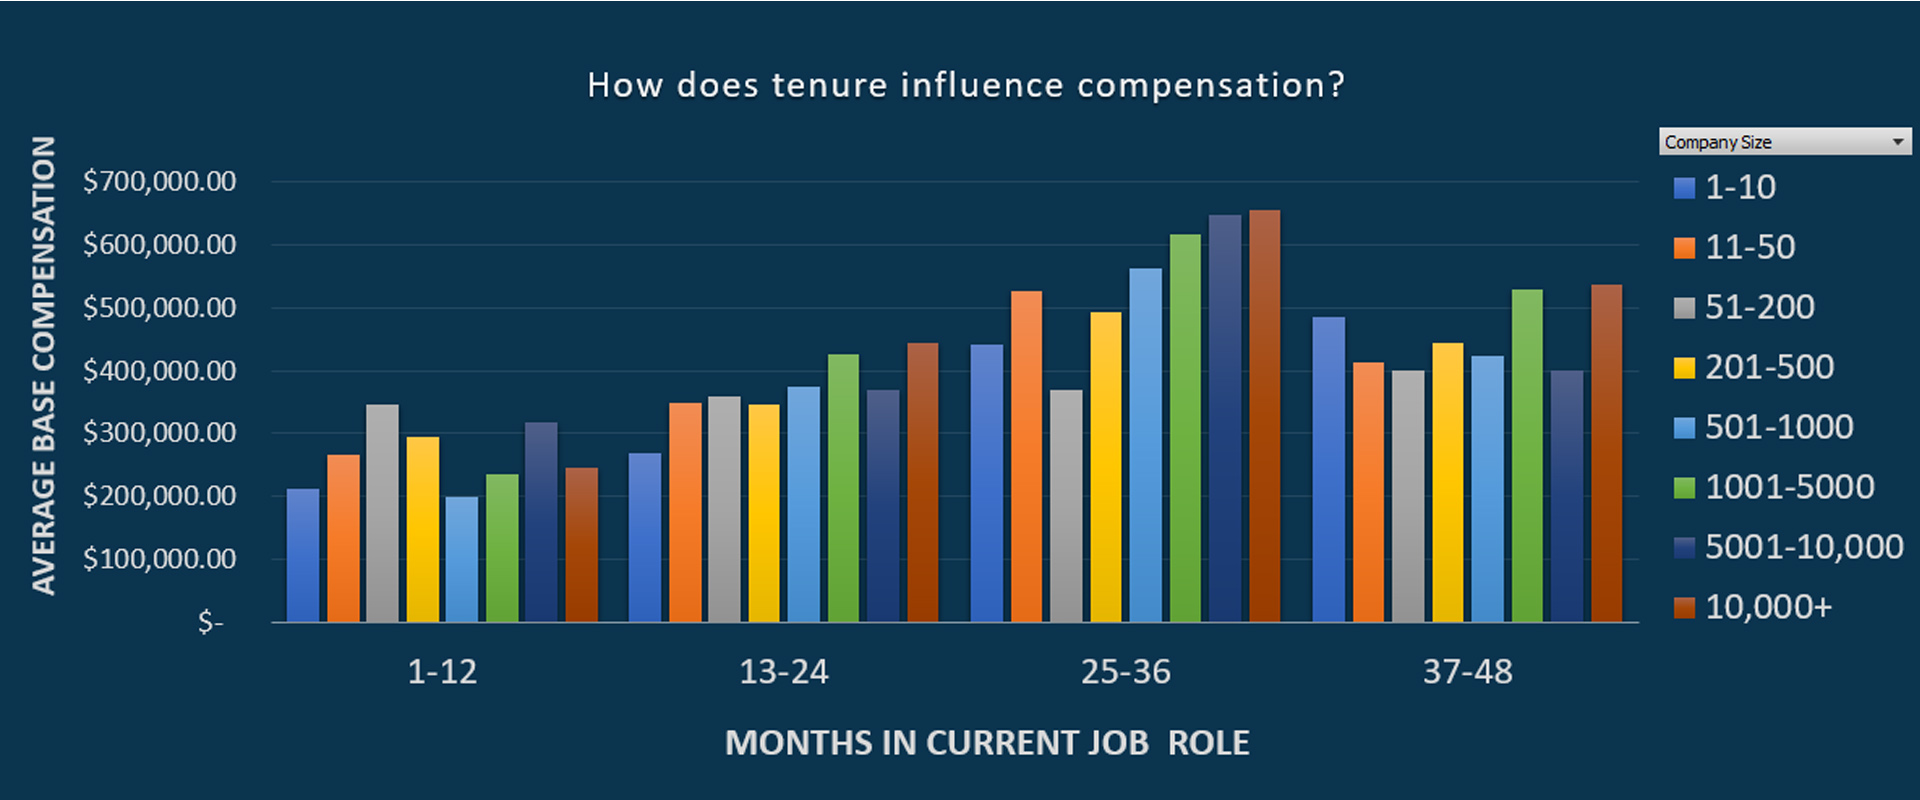 Does it pay to be loyal? How does tenure impact executive compensation